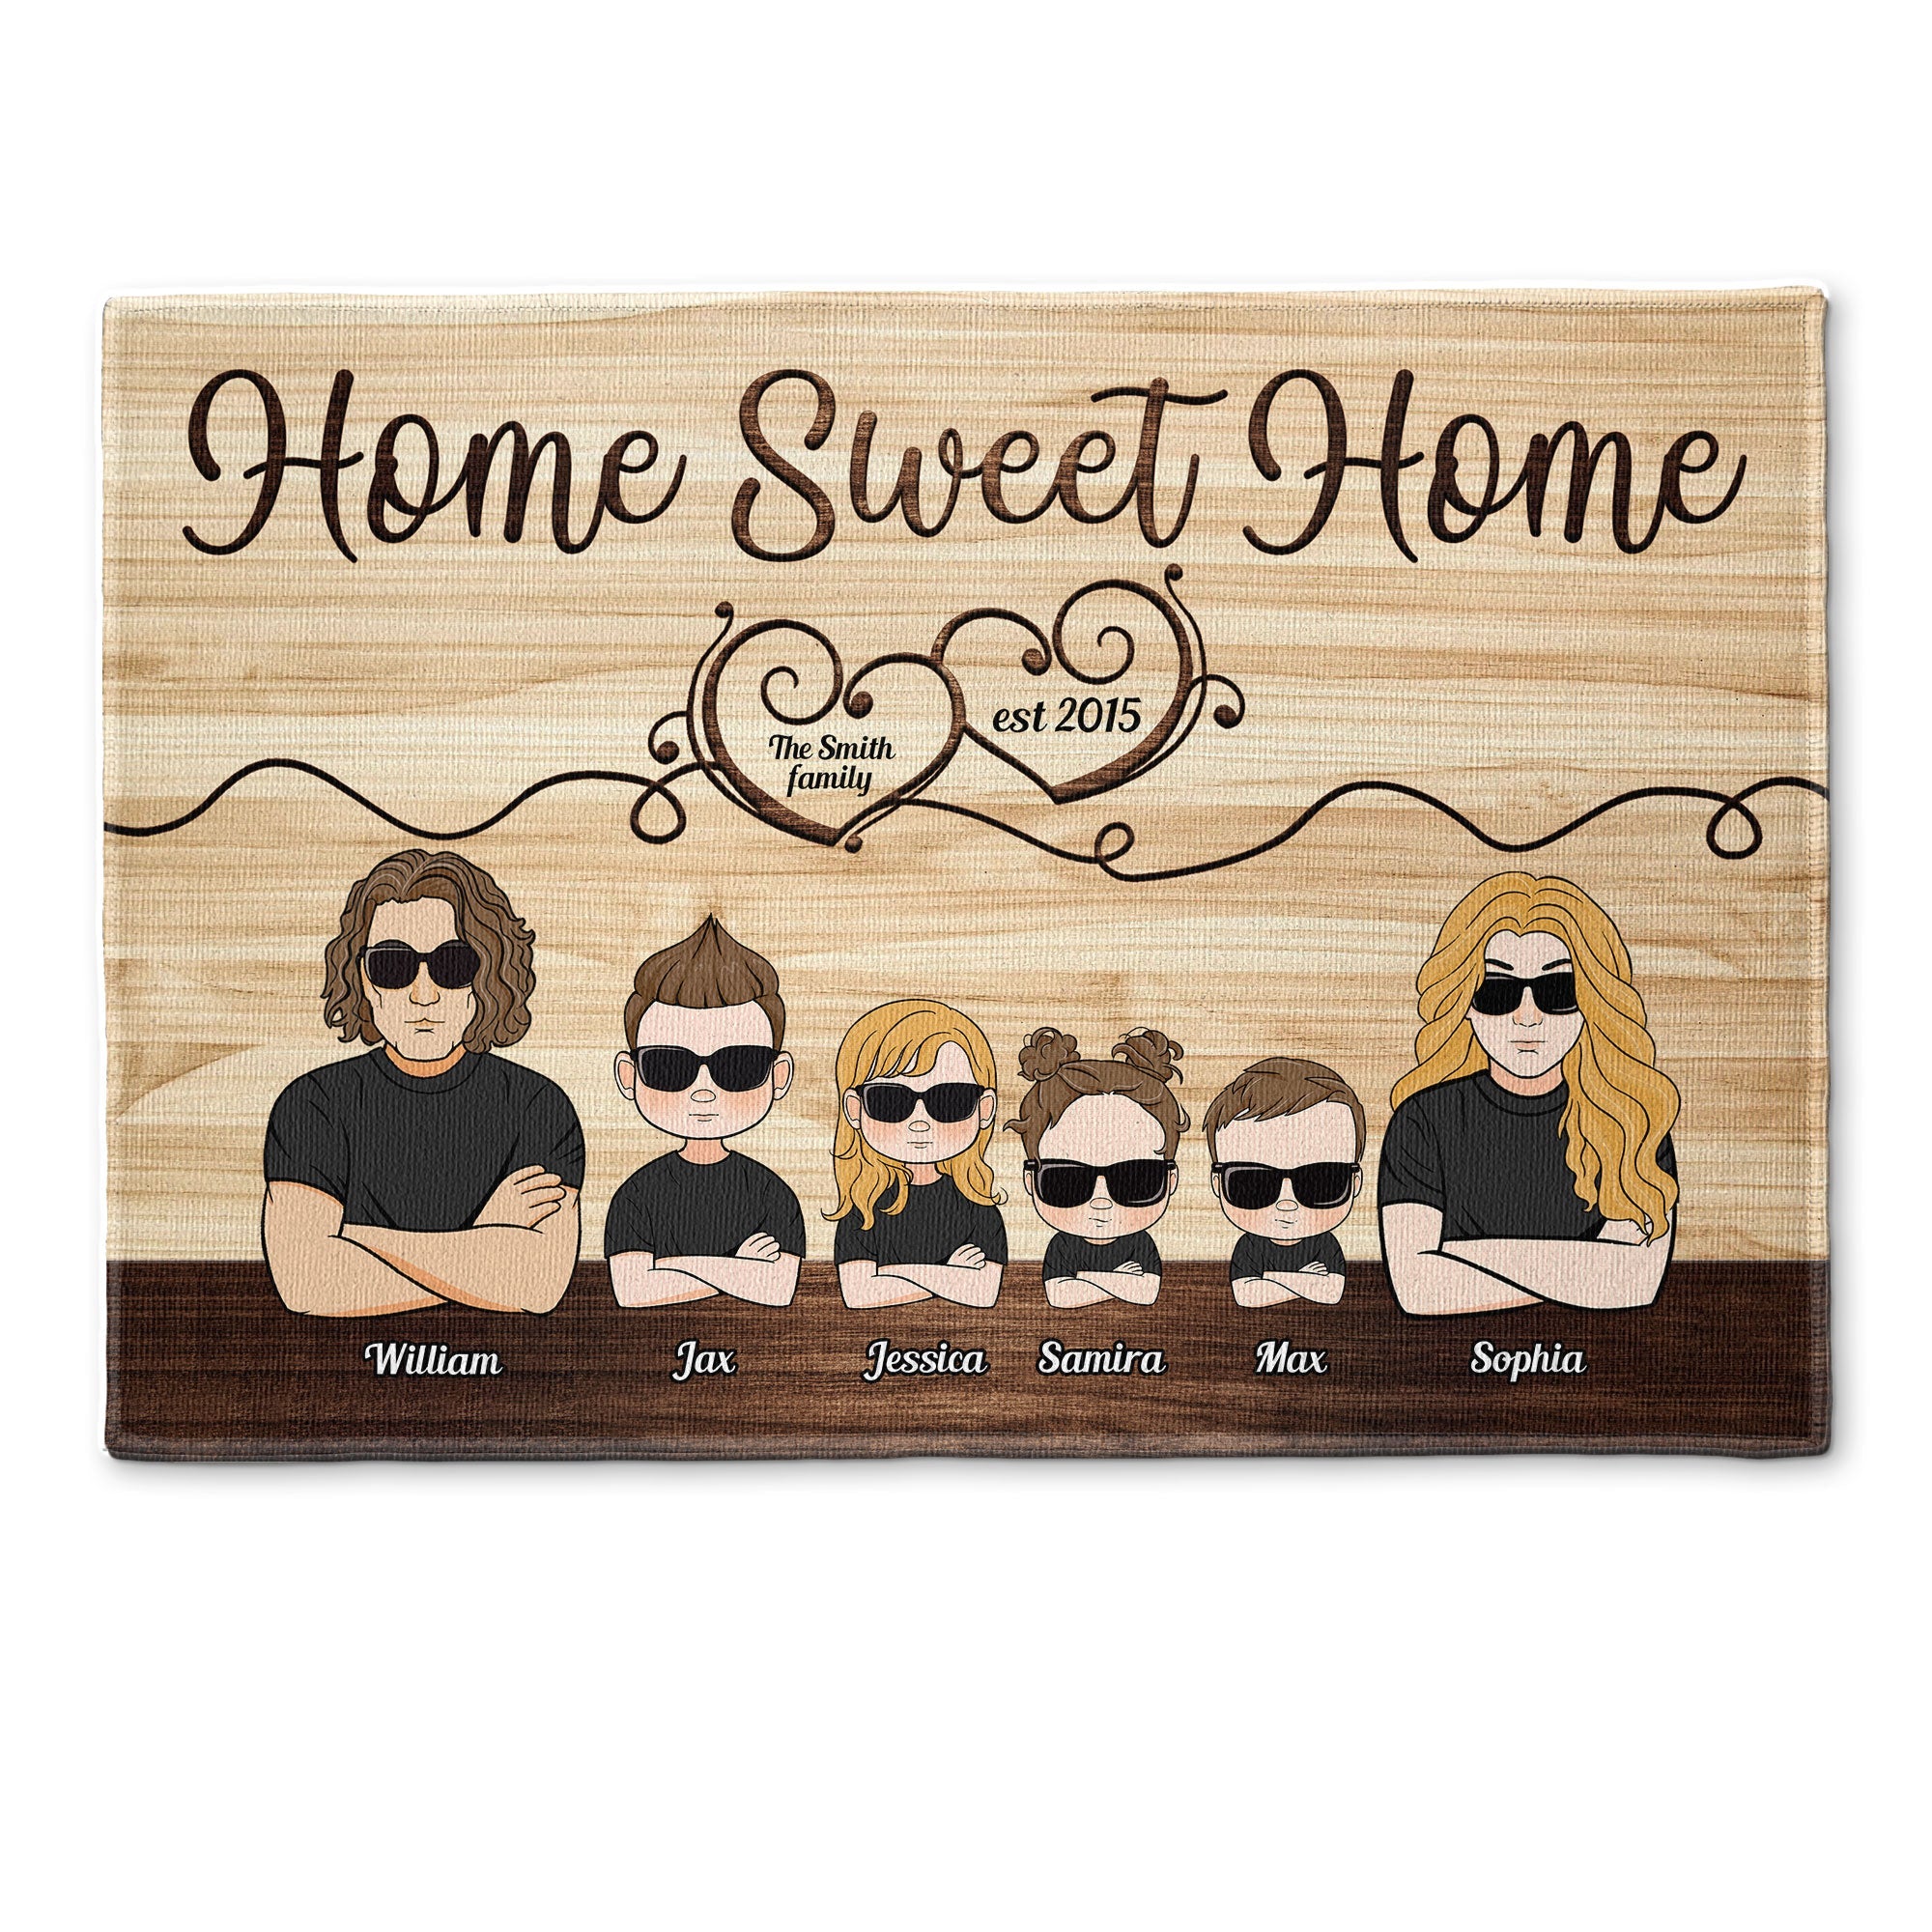 Image of Home Sweet Home - Personalized Doormat - Home Decor Gift For Husband, Wife, Parents - Christmas Decoration